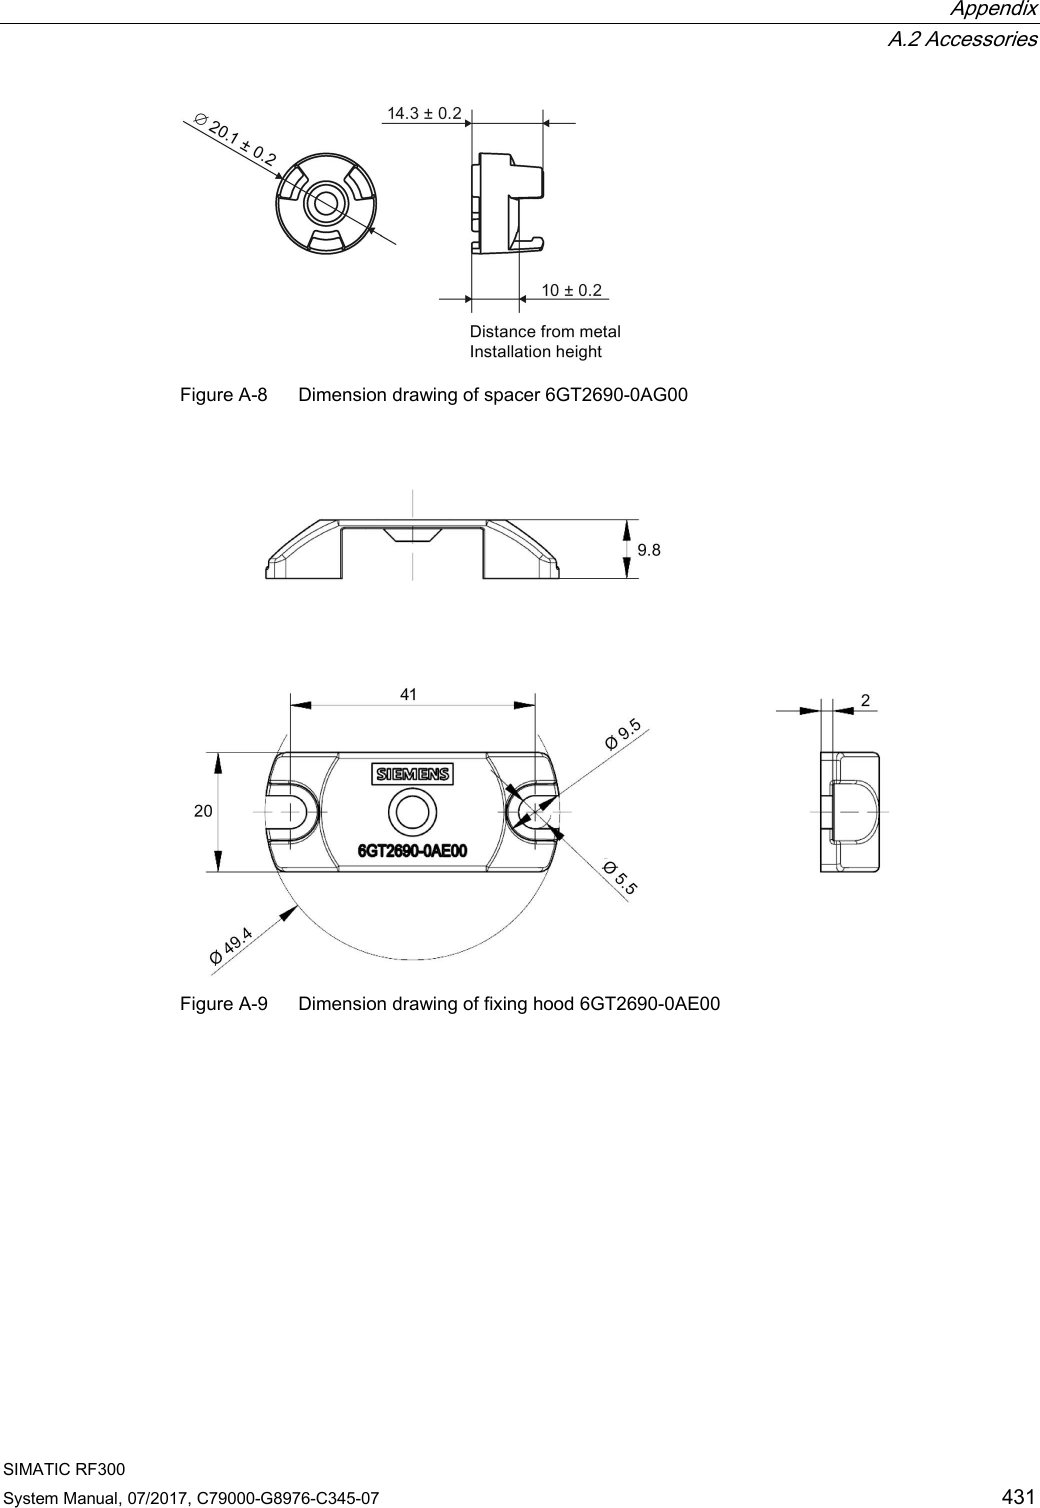  Appendix  A.2 Accessories SIMATIC RF300 System Manual, 07/2017, C79000-G8976-C345-07 431  Figure A-8  Dimension drawing of spacer 6GT2690-0AG00   Figure A-9  Dimension drawing of fixing hood 6GT2690-0AE00 